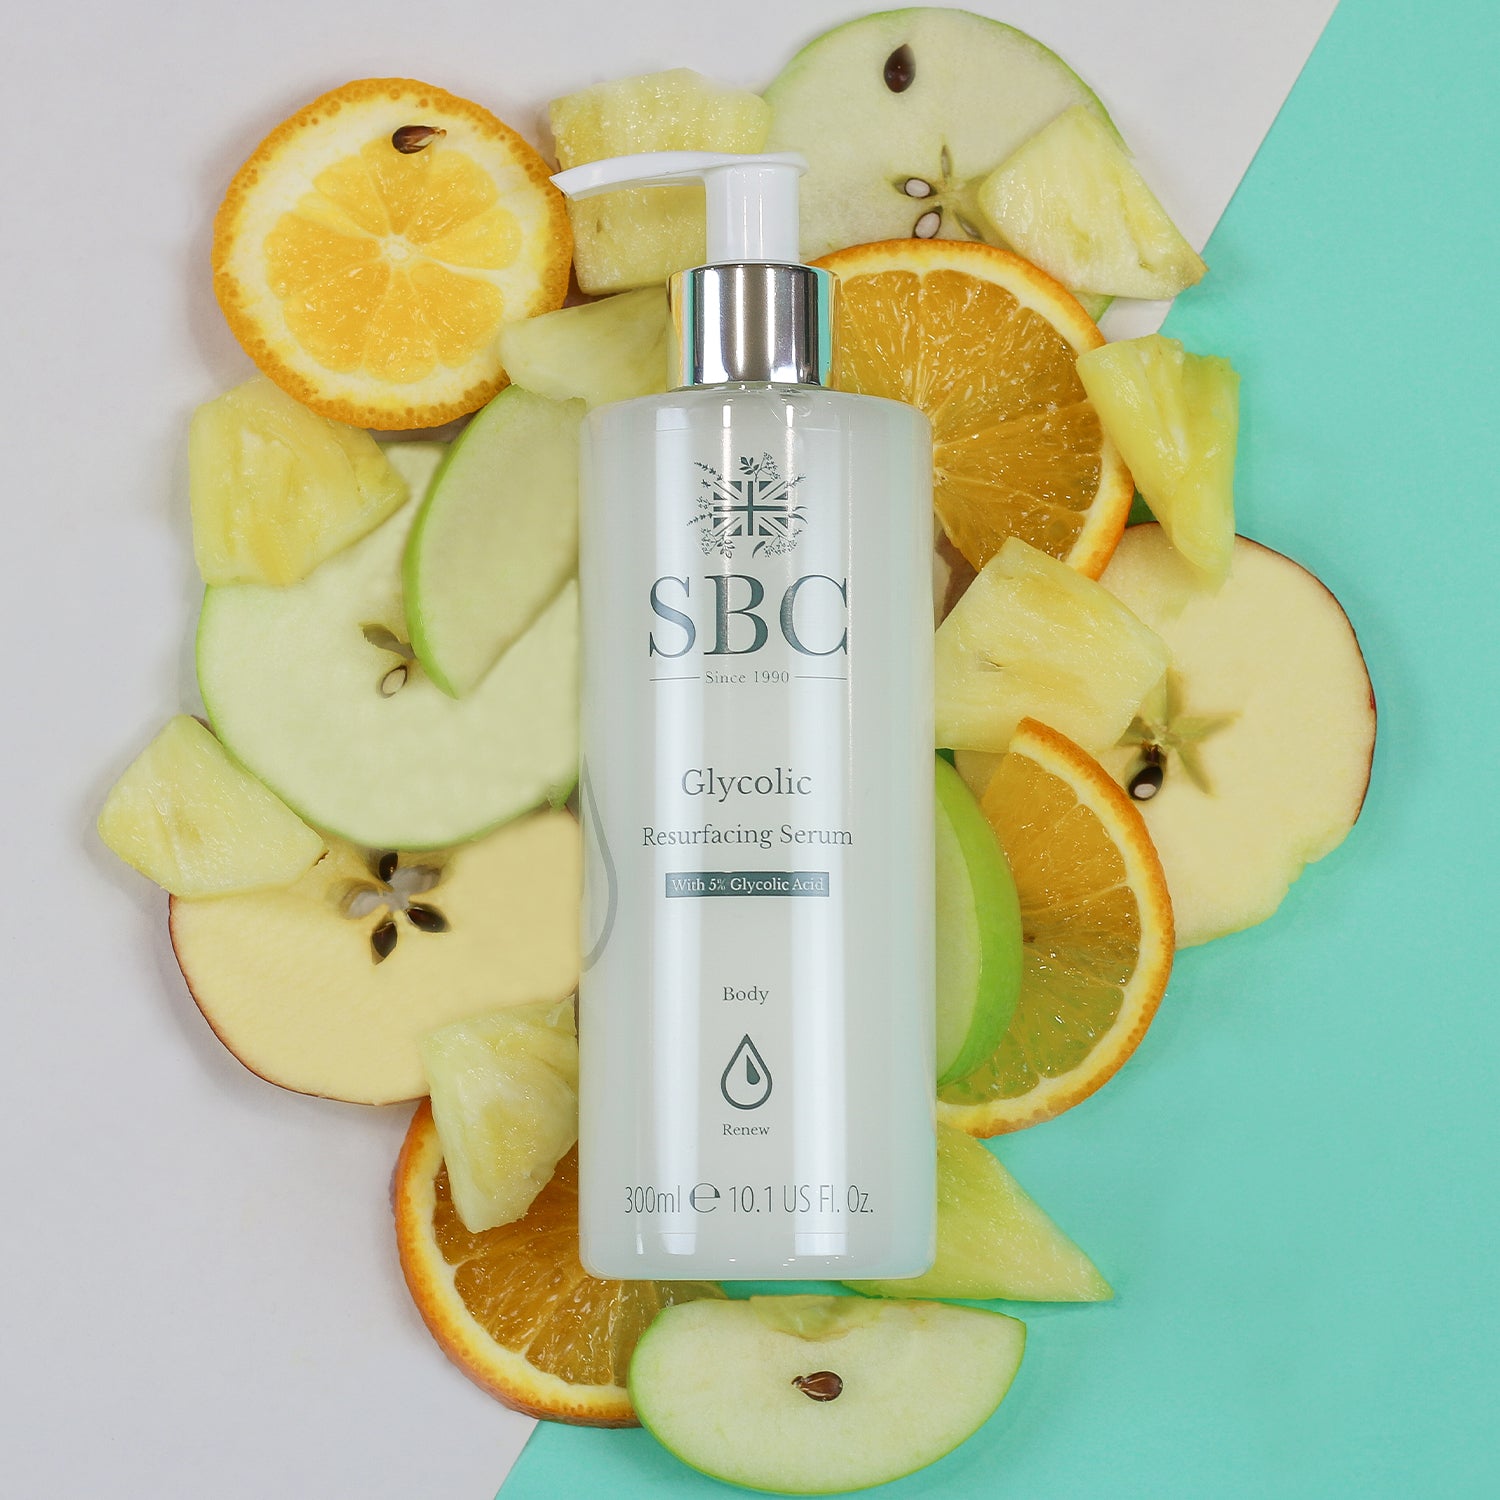 Glycolic Resurfacing Serum laid on a pile of slices of apples, oranges and pineapples